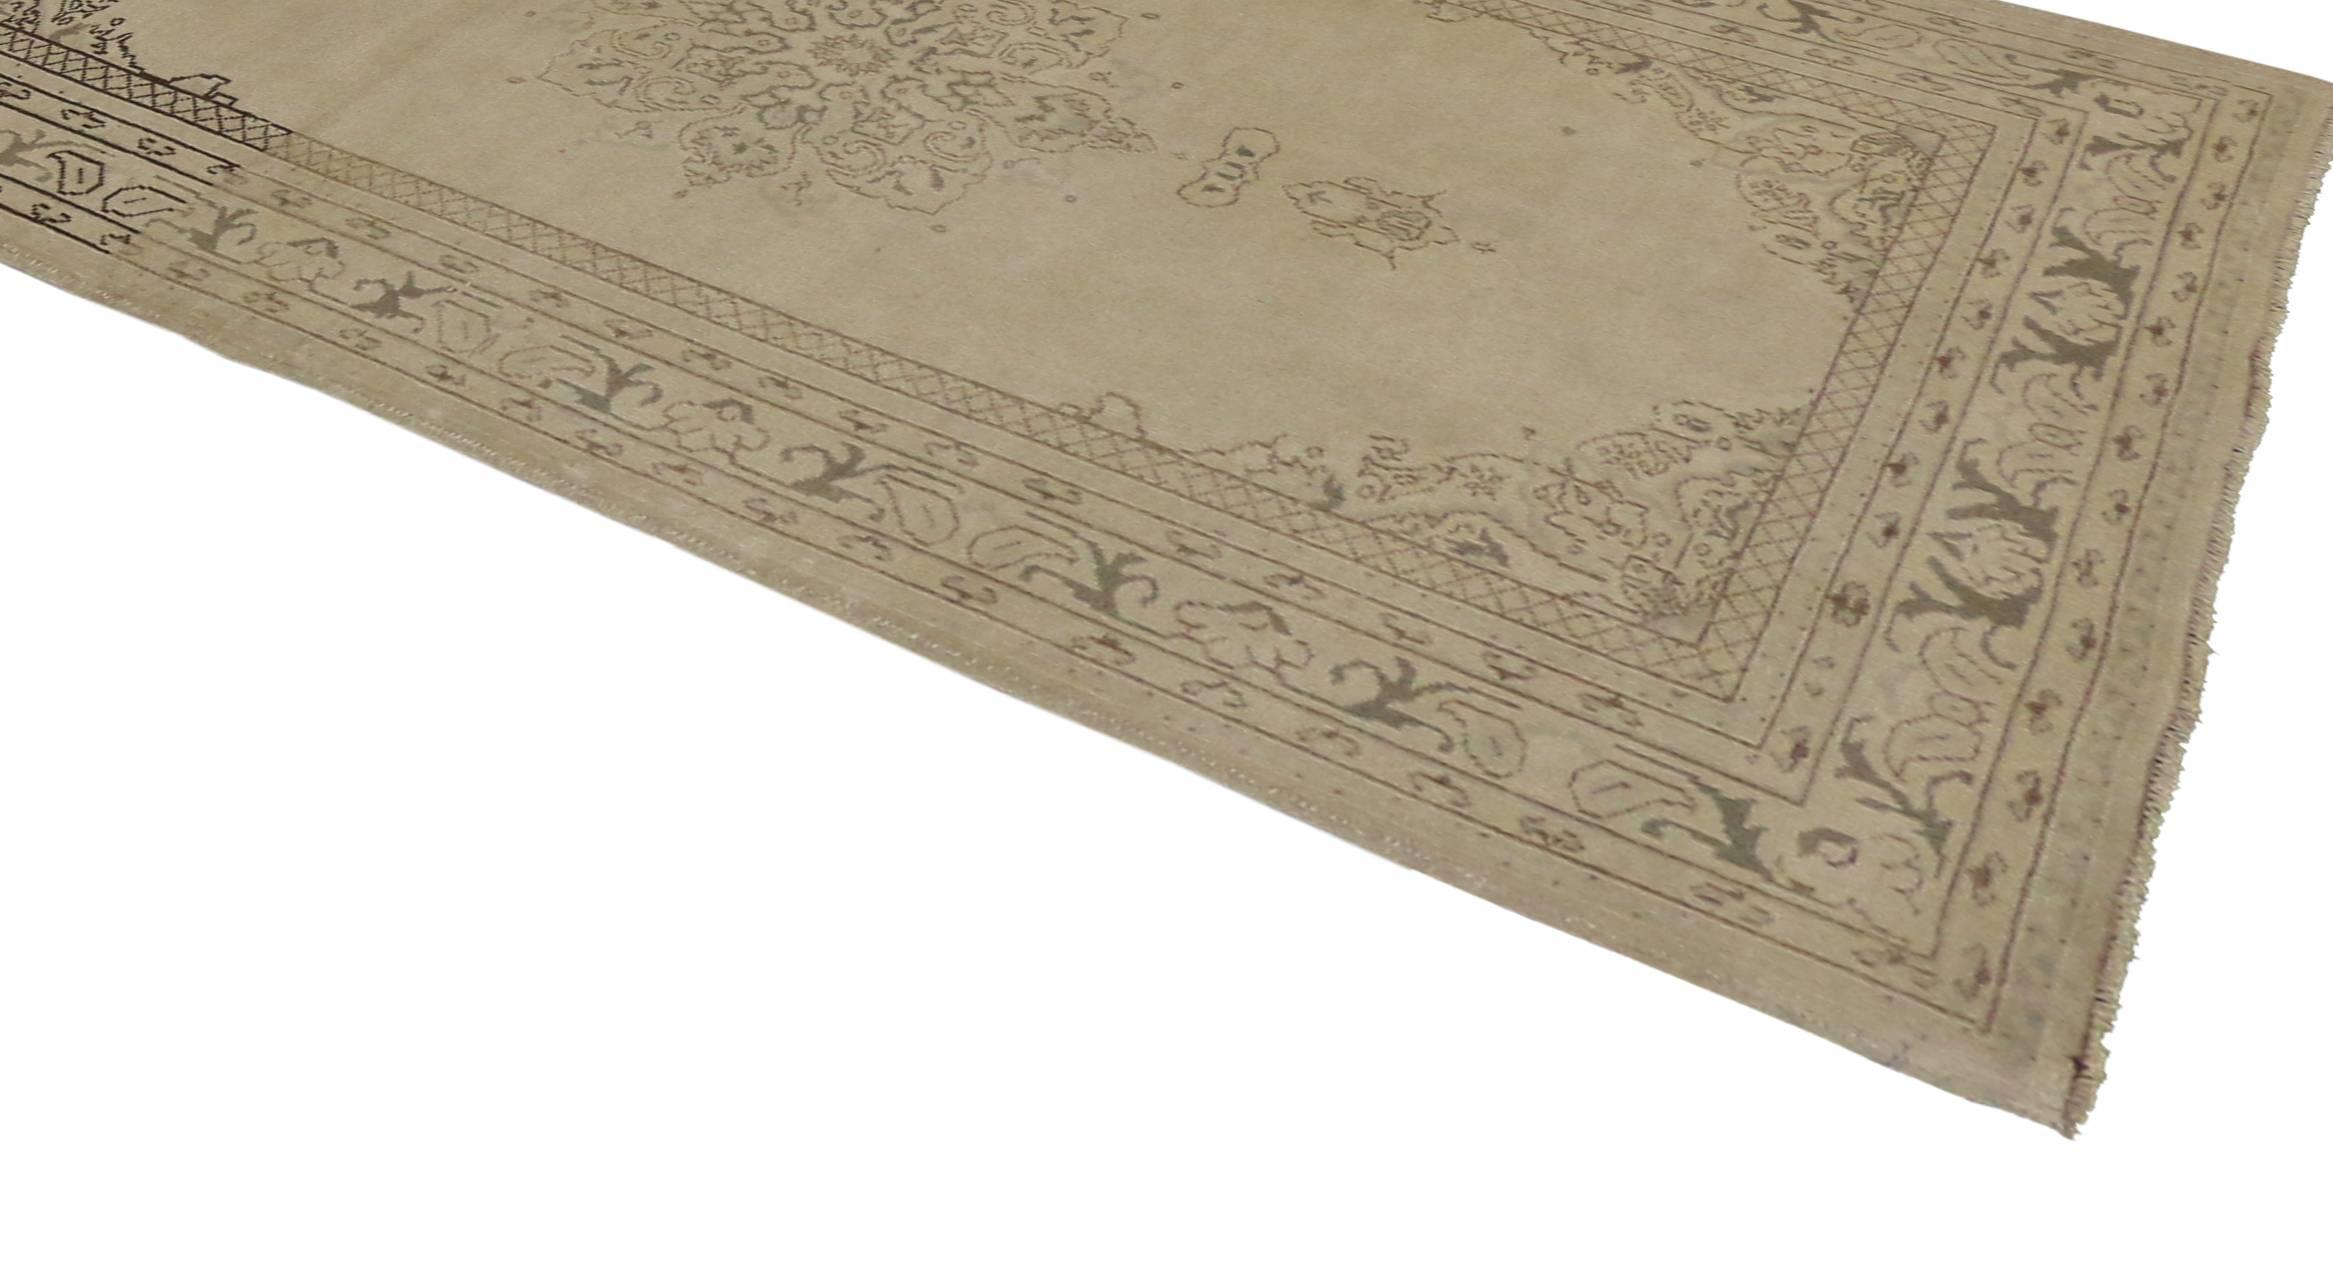 51041 Vintage Turkish Oushak Runner with Swedish Shabby Chic Cottage Style. This hand knotted wool vintage Turkish Oushak runner creates a stylish runway for nearly any tastefully appointed interior. It features three open eight-point floral